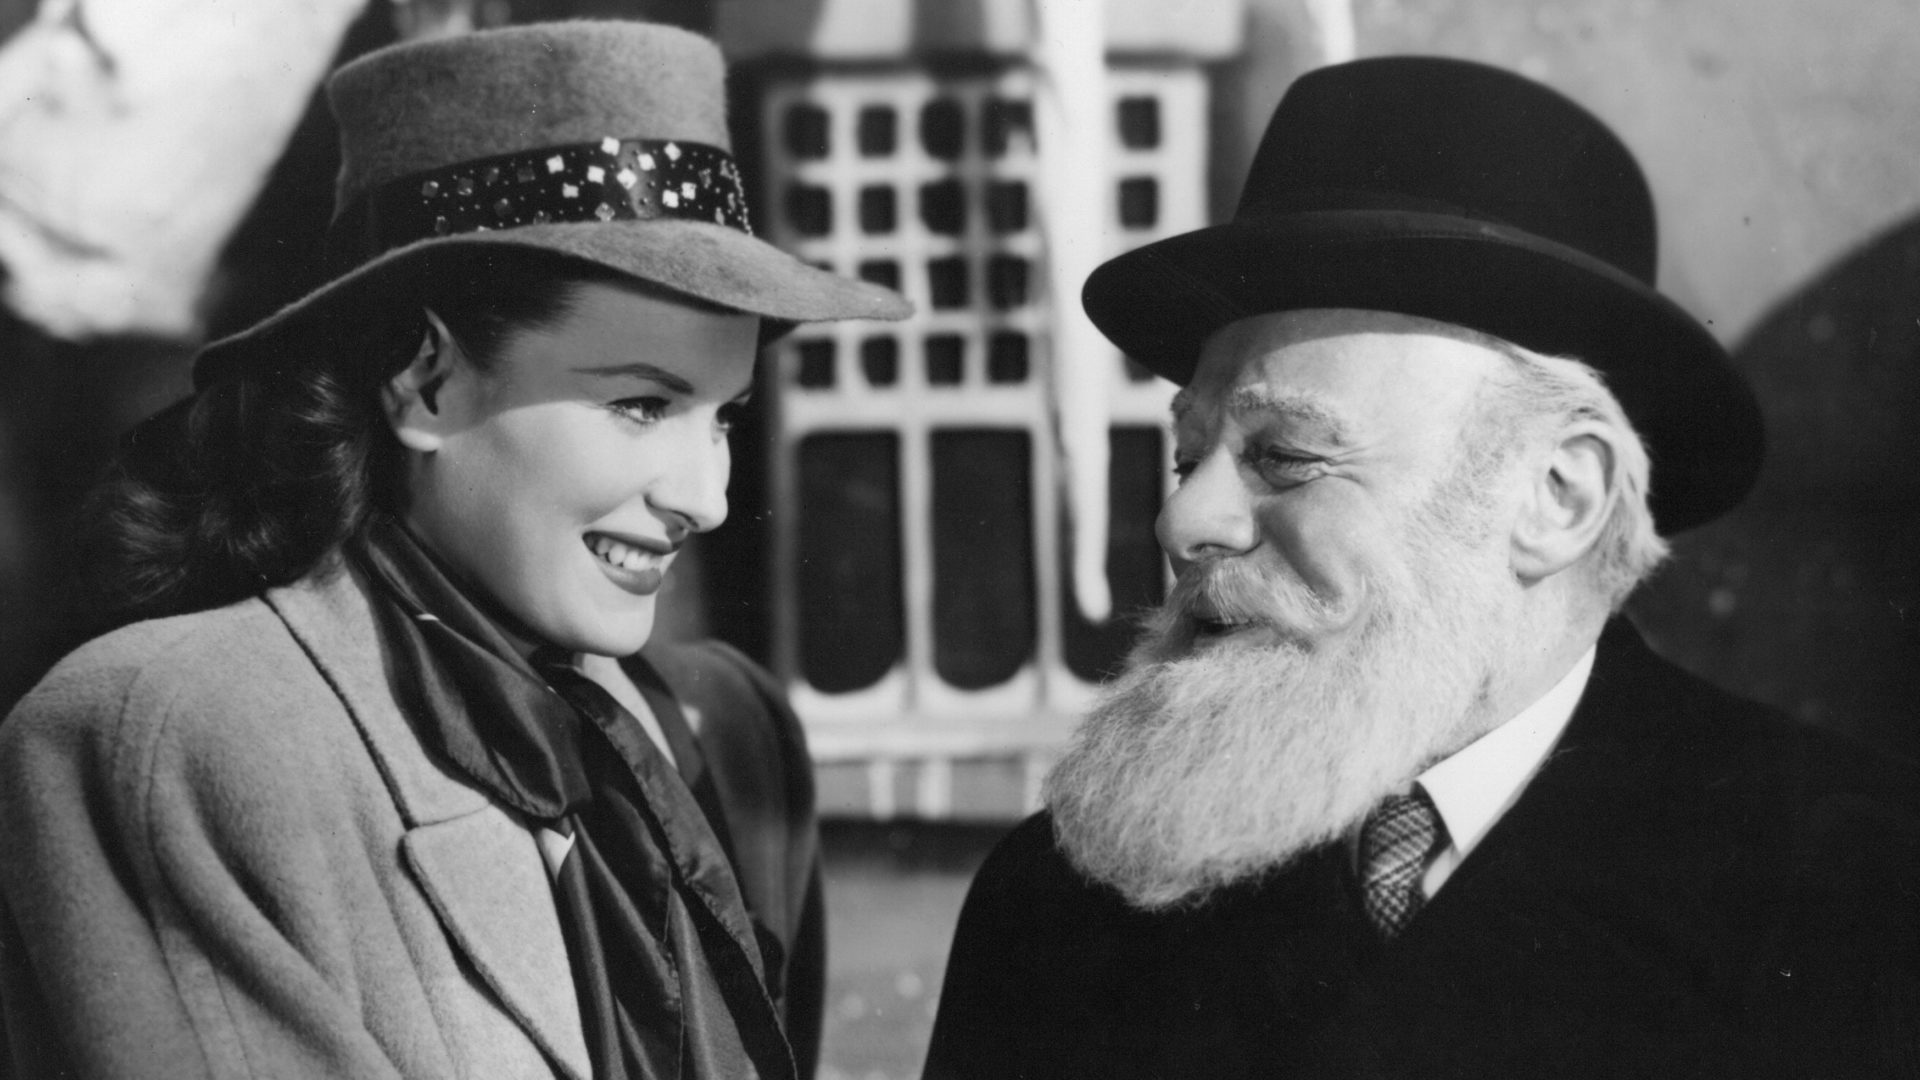 A department store Santa Claus sets the stage for drama in this holiday comedy classic starring Maureen O’Hara, John Payne, Natalie Wood and Edmund Gwenn.